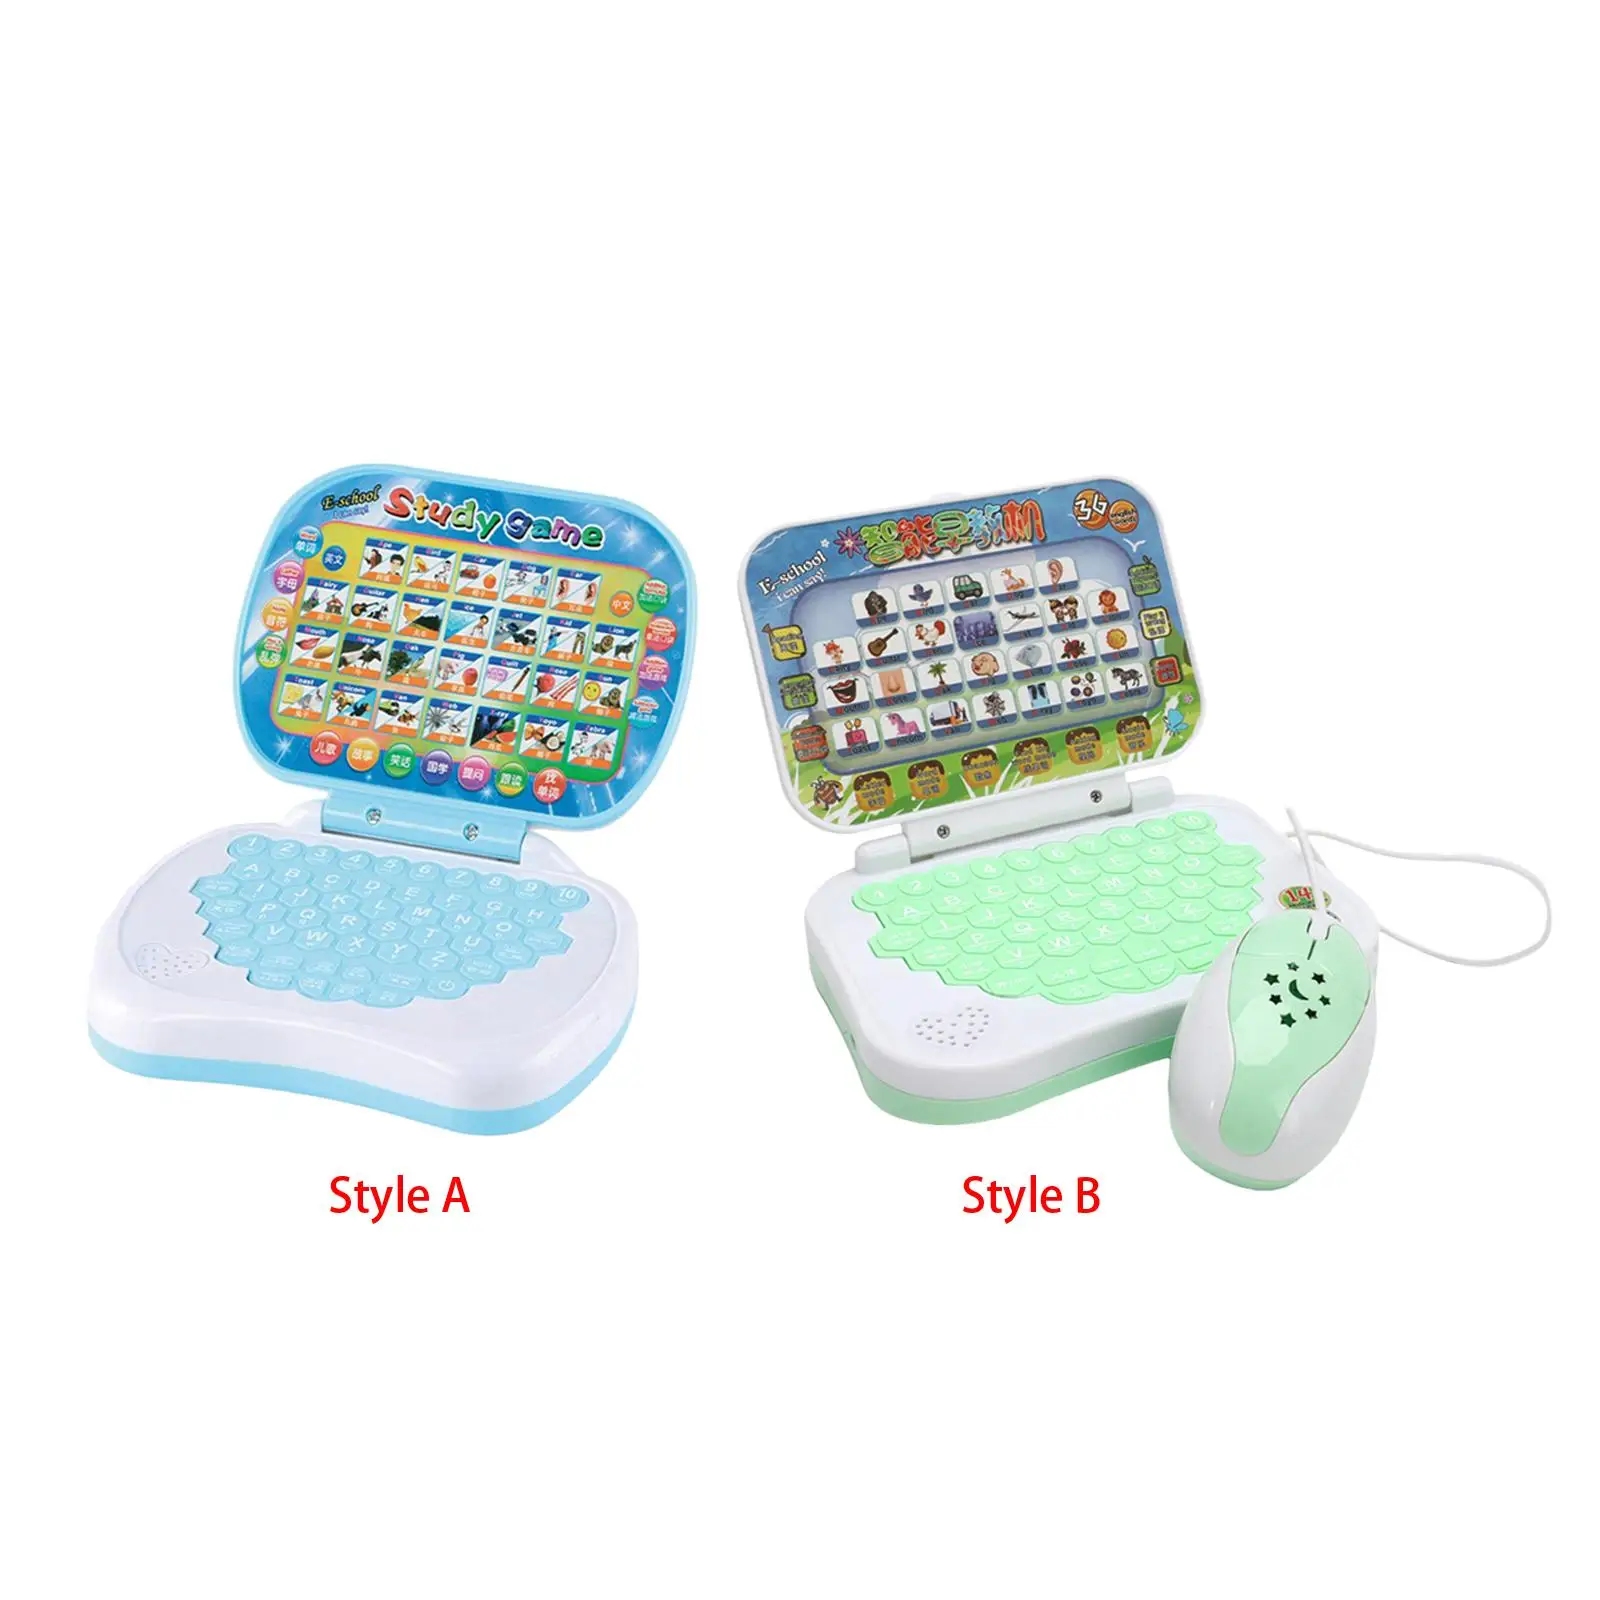 Handheld Language Learning Machine Child Interactive Learning Pad Tablet for Toddler